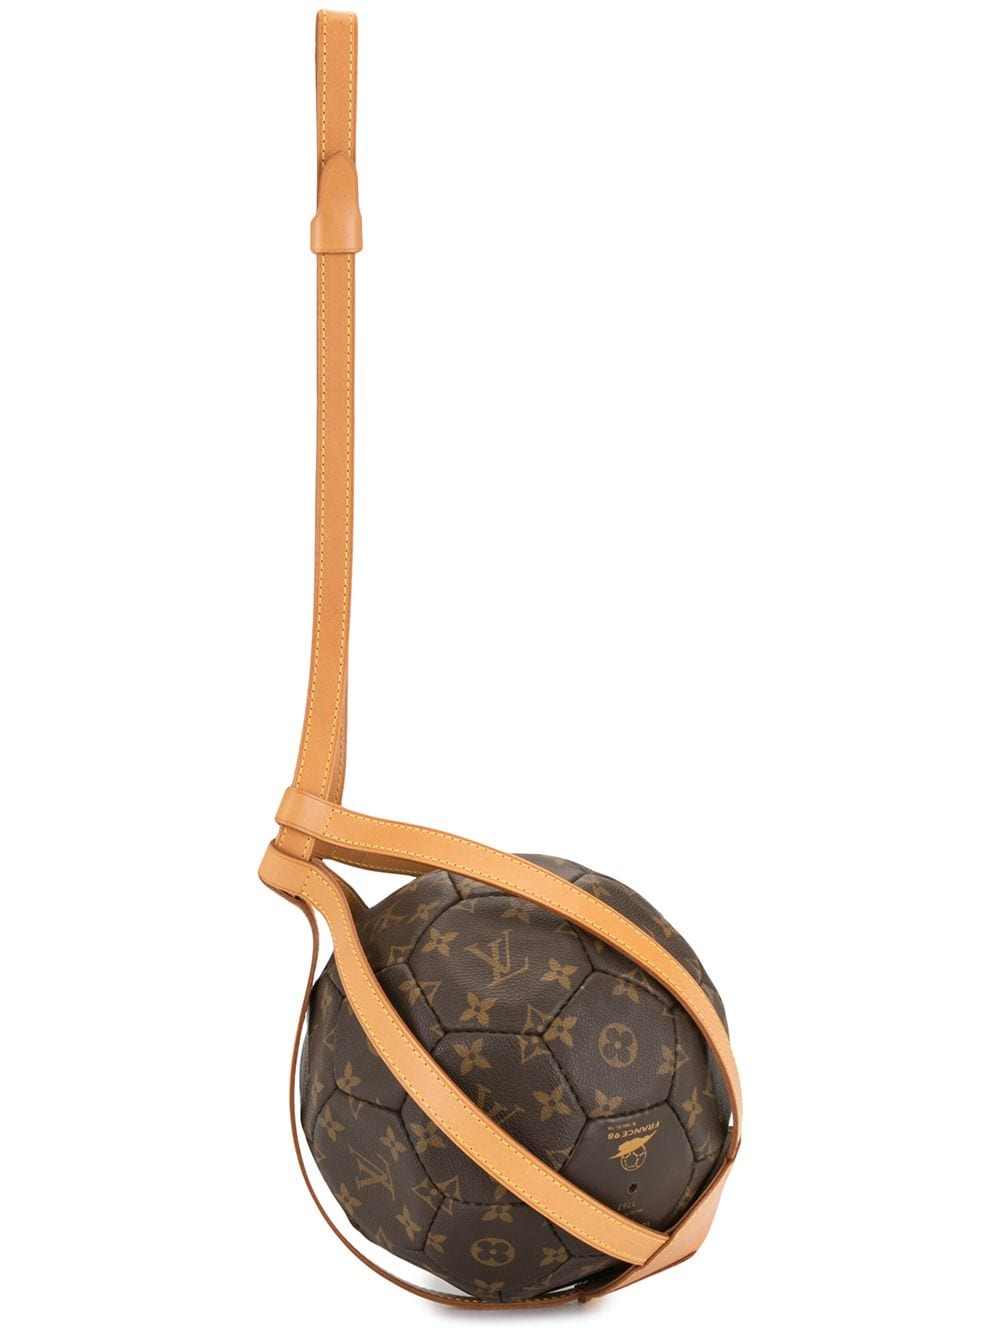 Louis Vuitton Monogram World Cup Limited Edition Soccer Ball at